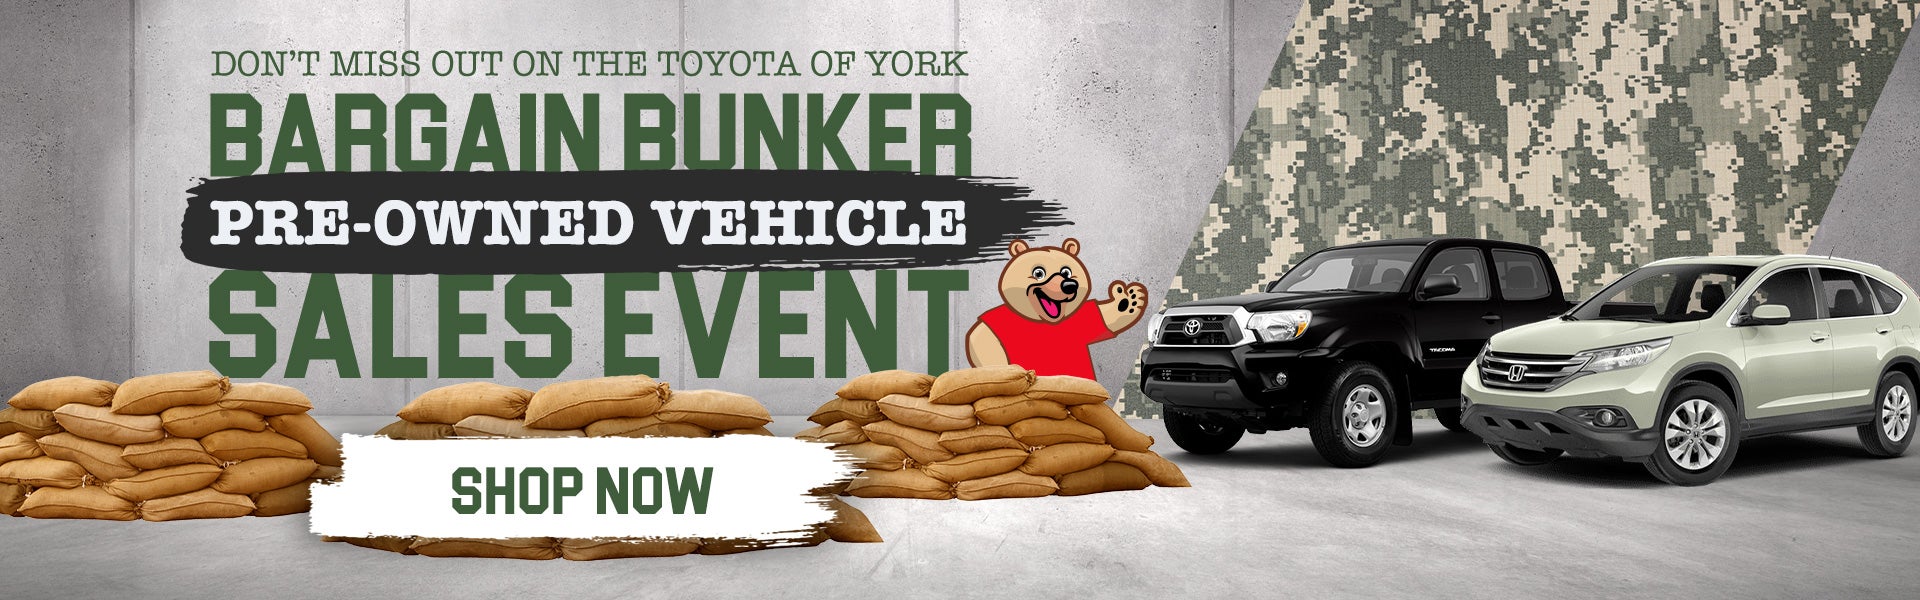 Bargain Bunker Pre Owned Sales Event in York PA